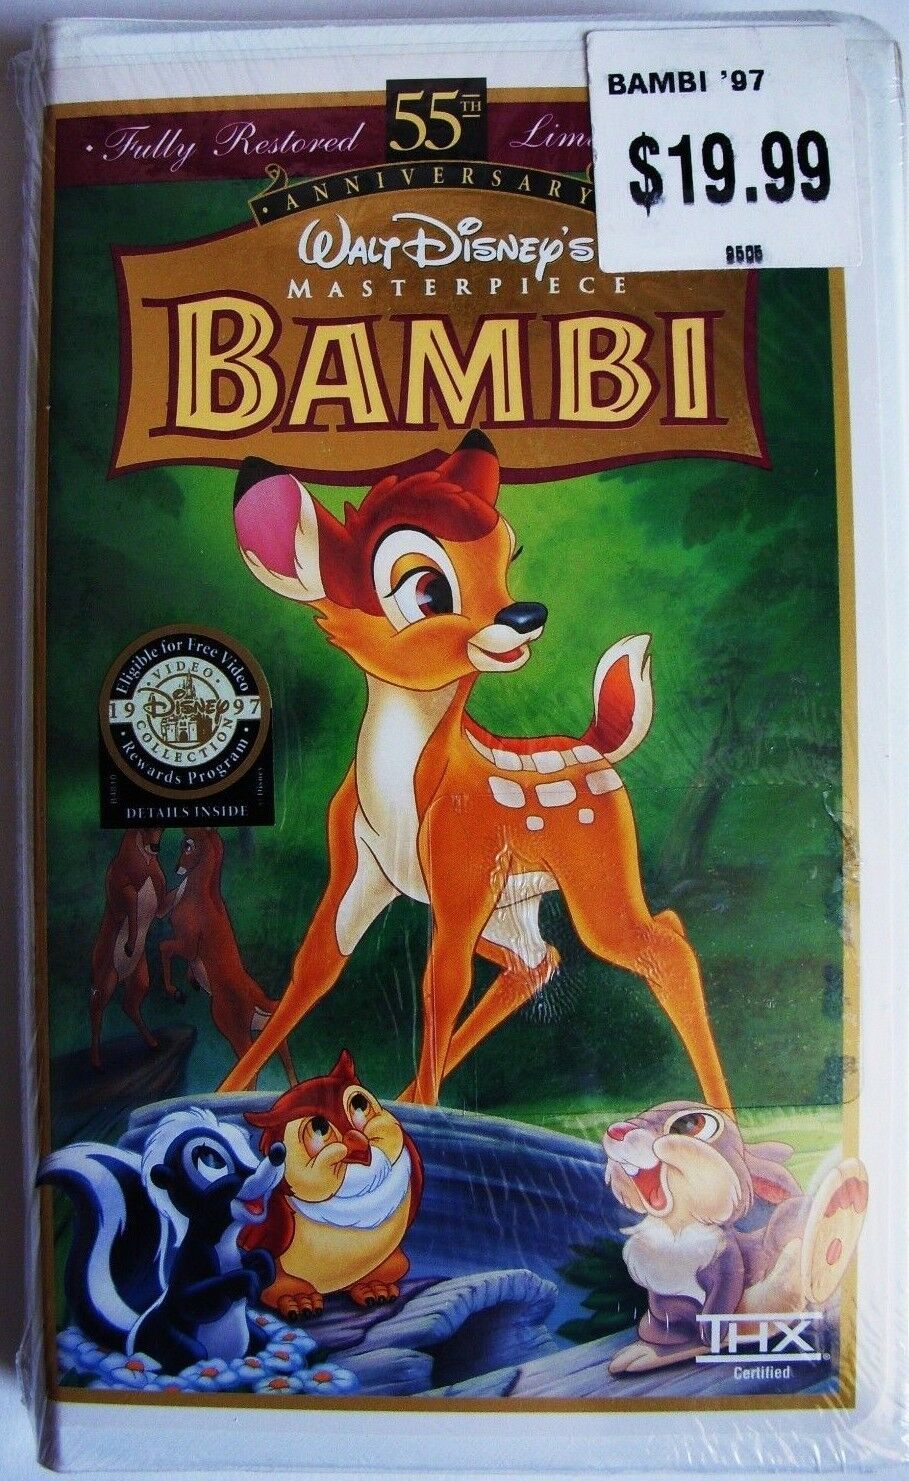 Primary image for Bambi VHS 1997 Disney Masterpiece 55th Anniversary Limited Edit NEW SEALED OOP